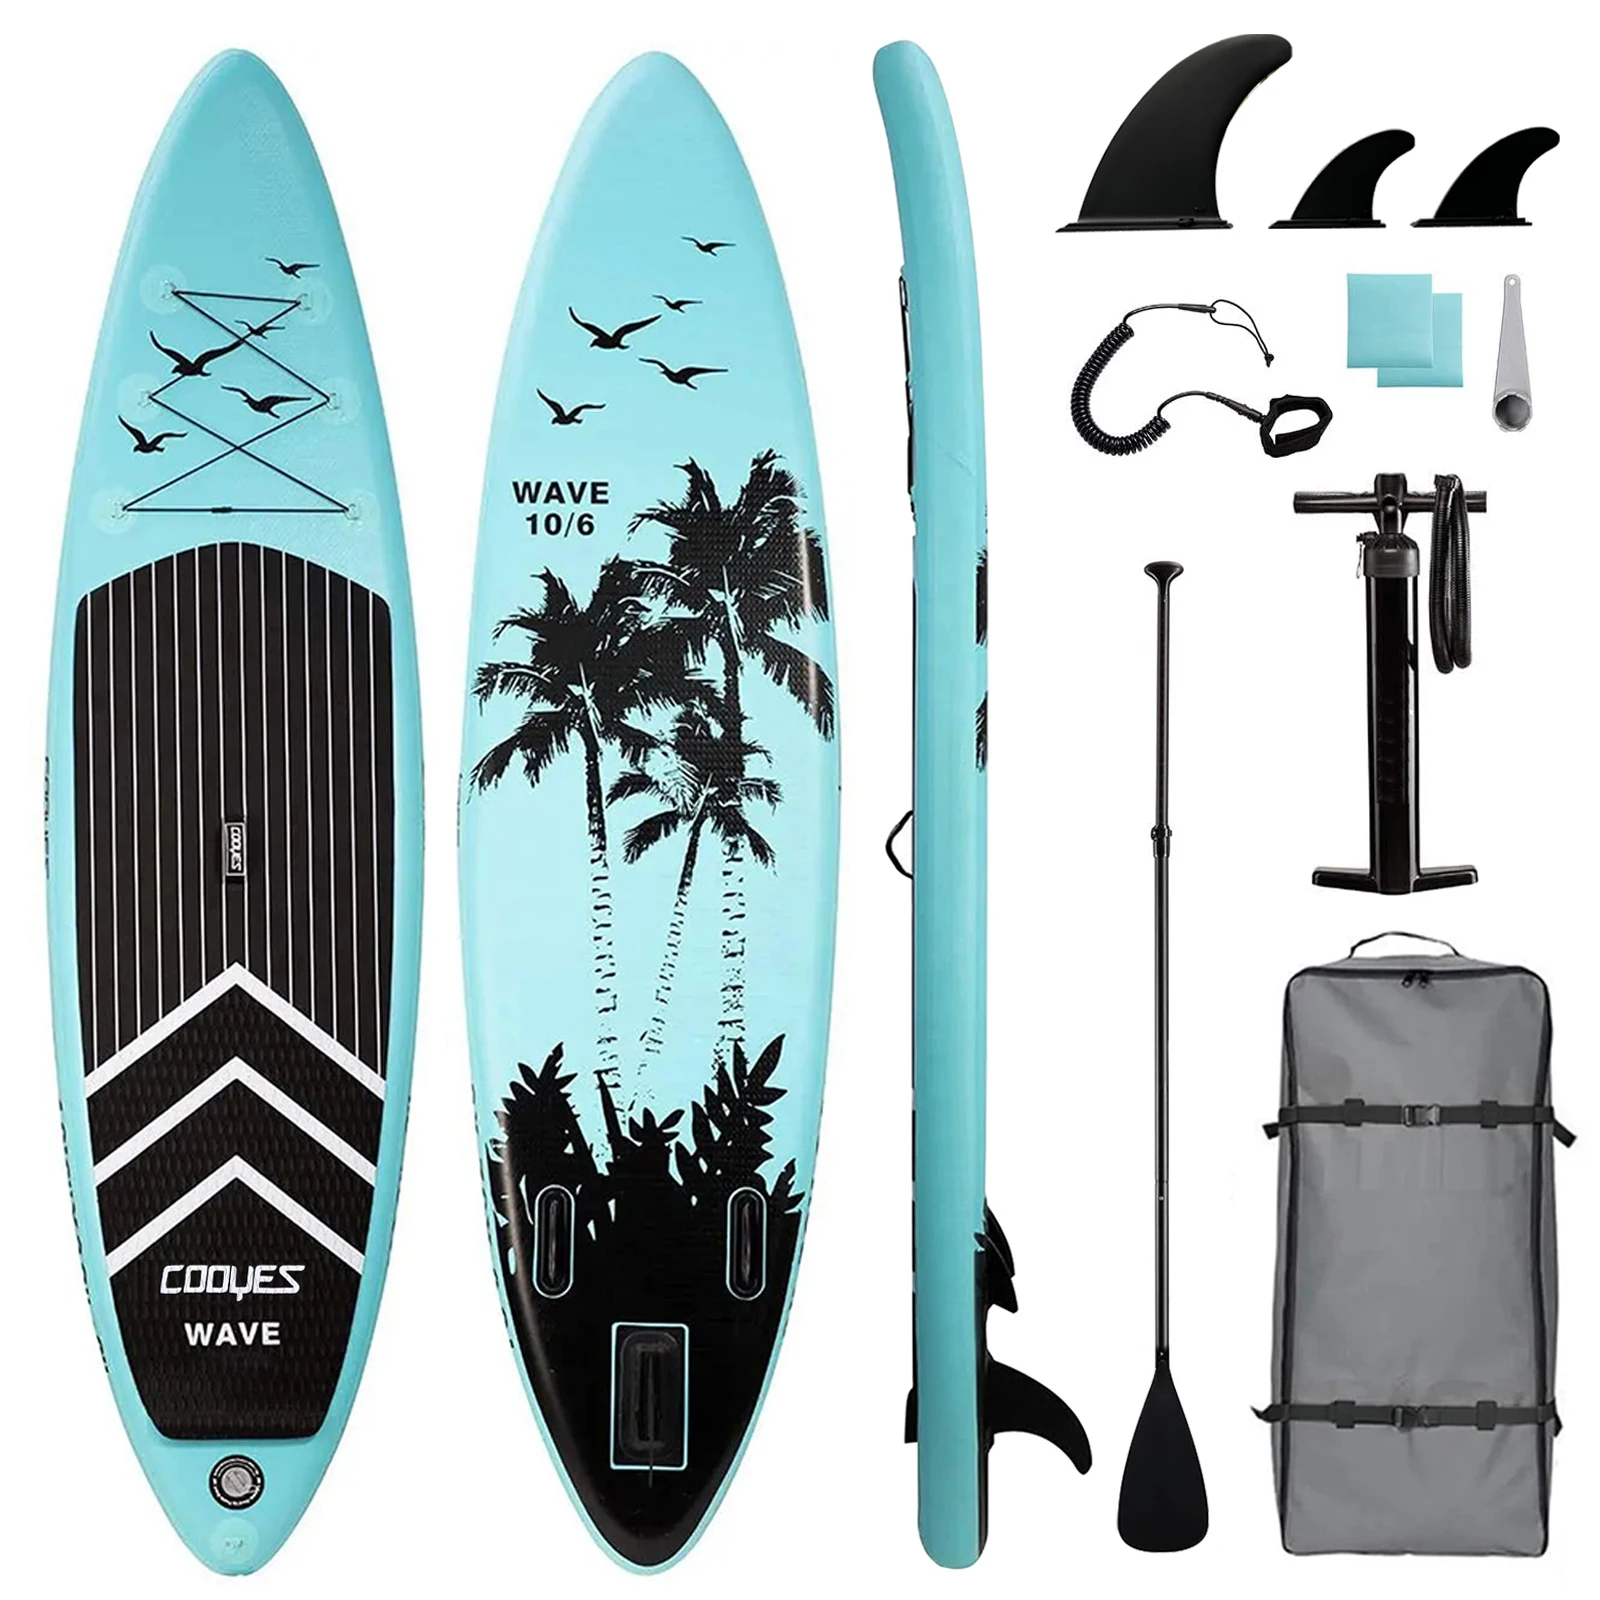 

320cm Inflatable Stand Up Paddle Boards with Premium SUP Paddle Board Accessories, Wide Stance, Non-Slip Comfort Deck